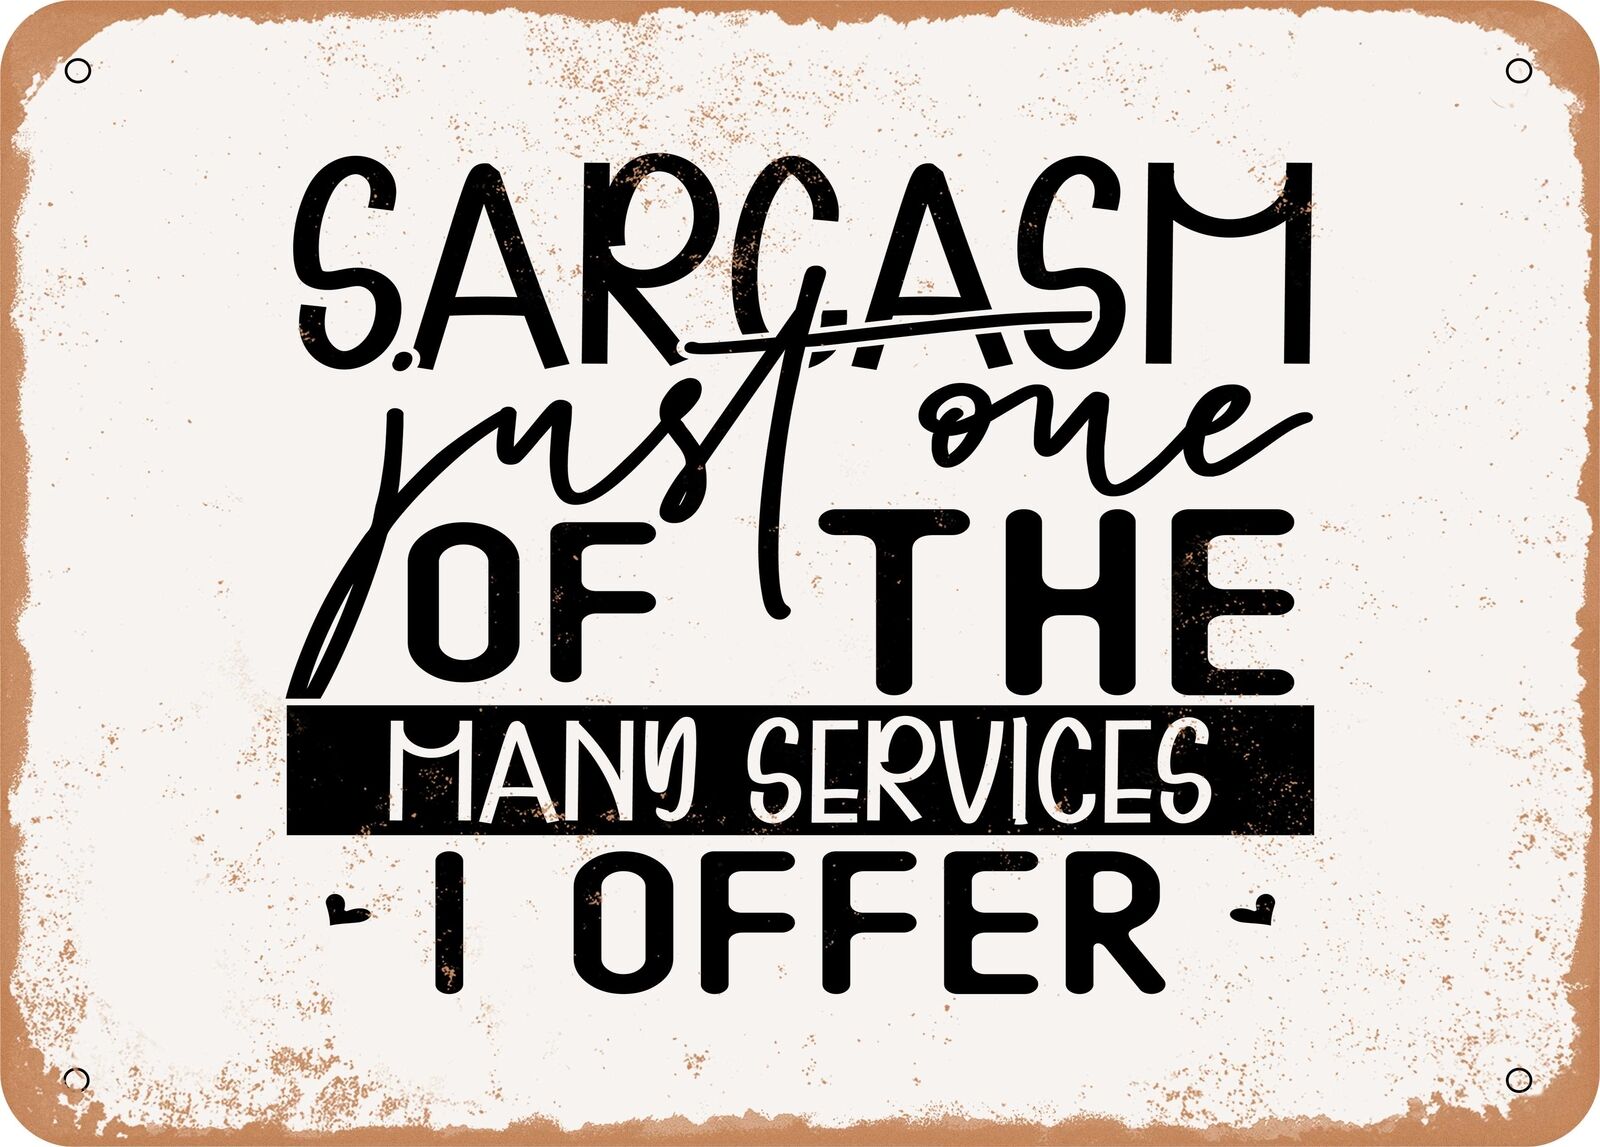 Metal Sign - Sarcasm Just One of the Many Services I Offer - Vintage Look Sign